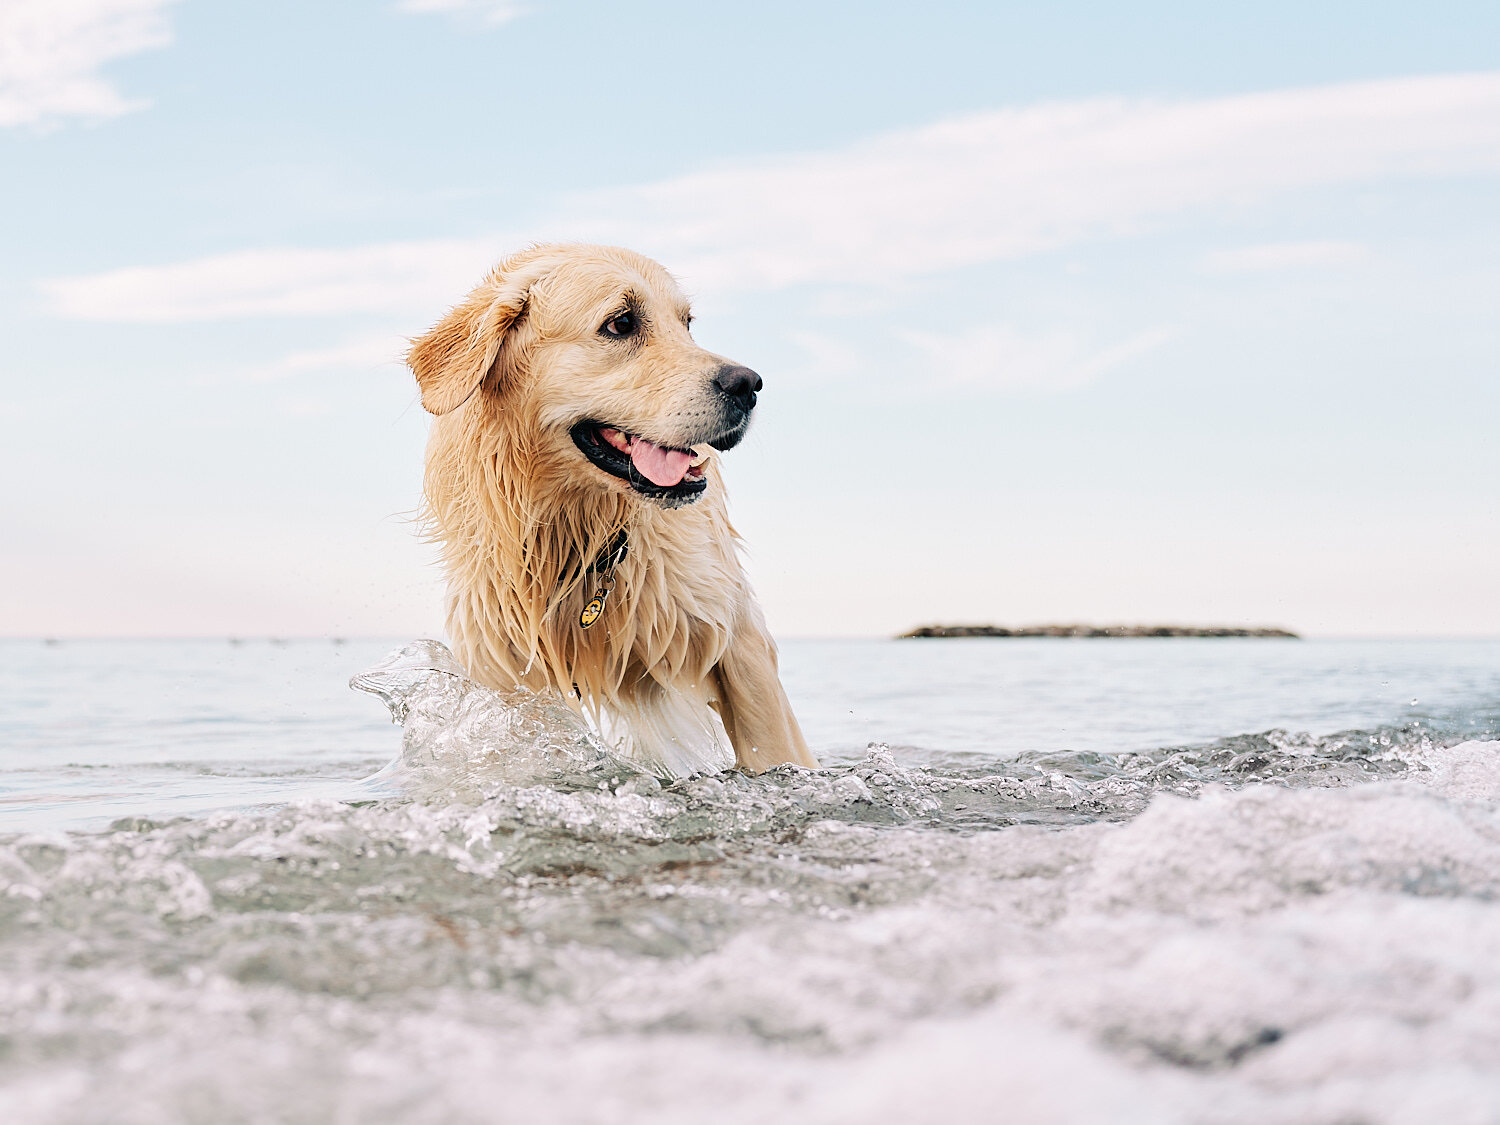  Joyka the Golden Retriever is enjoying time on the beach at Presque Isle State Park on Lake Erie in Western Pennsylvania, USA. The dog loves swimming and splashes joyfully in the waves. 